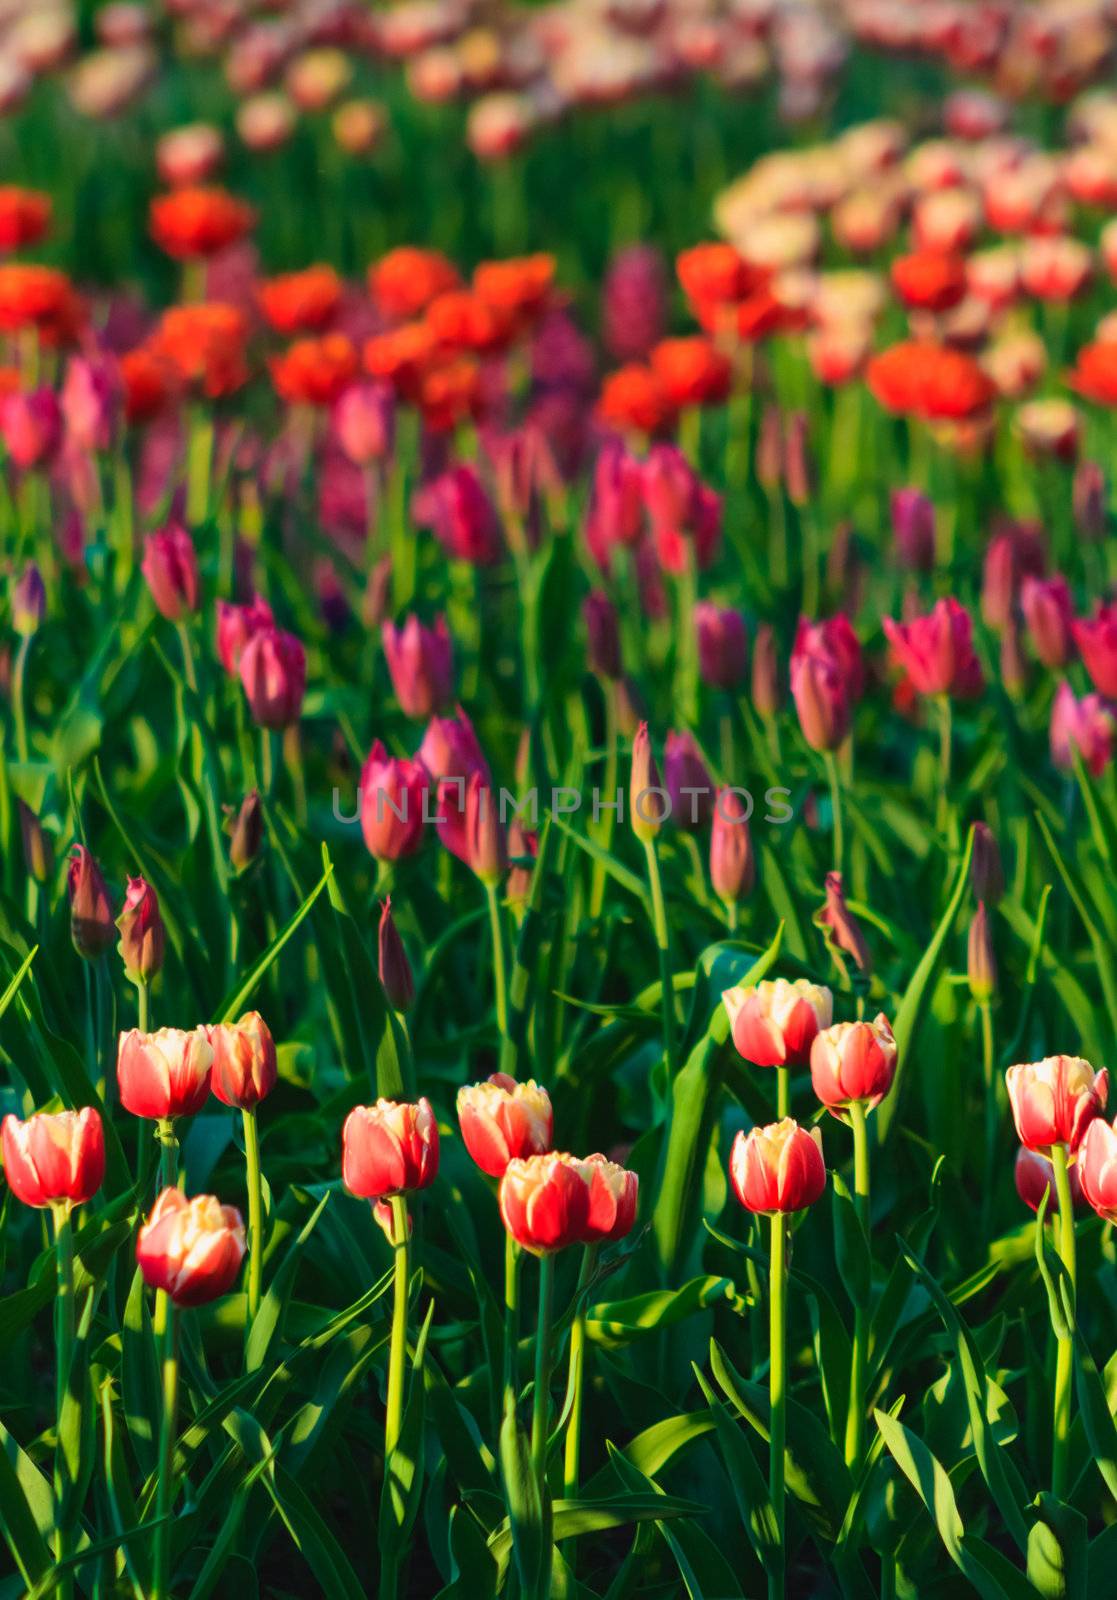 Red and Yellow Tulips in A Garden by ryhor